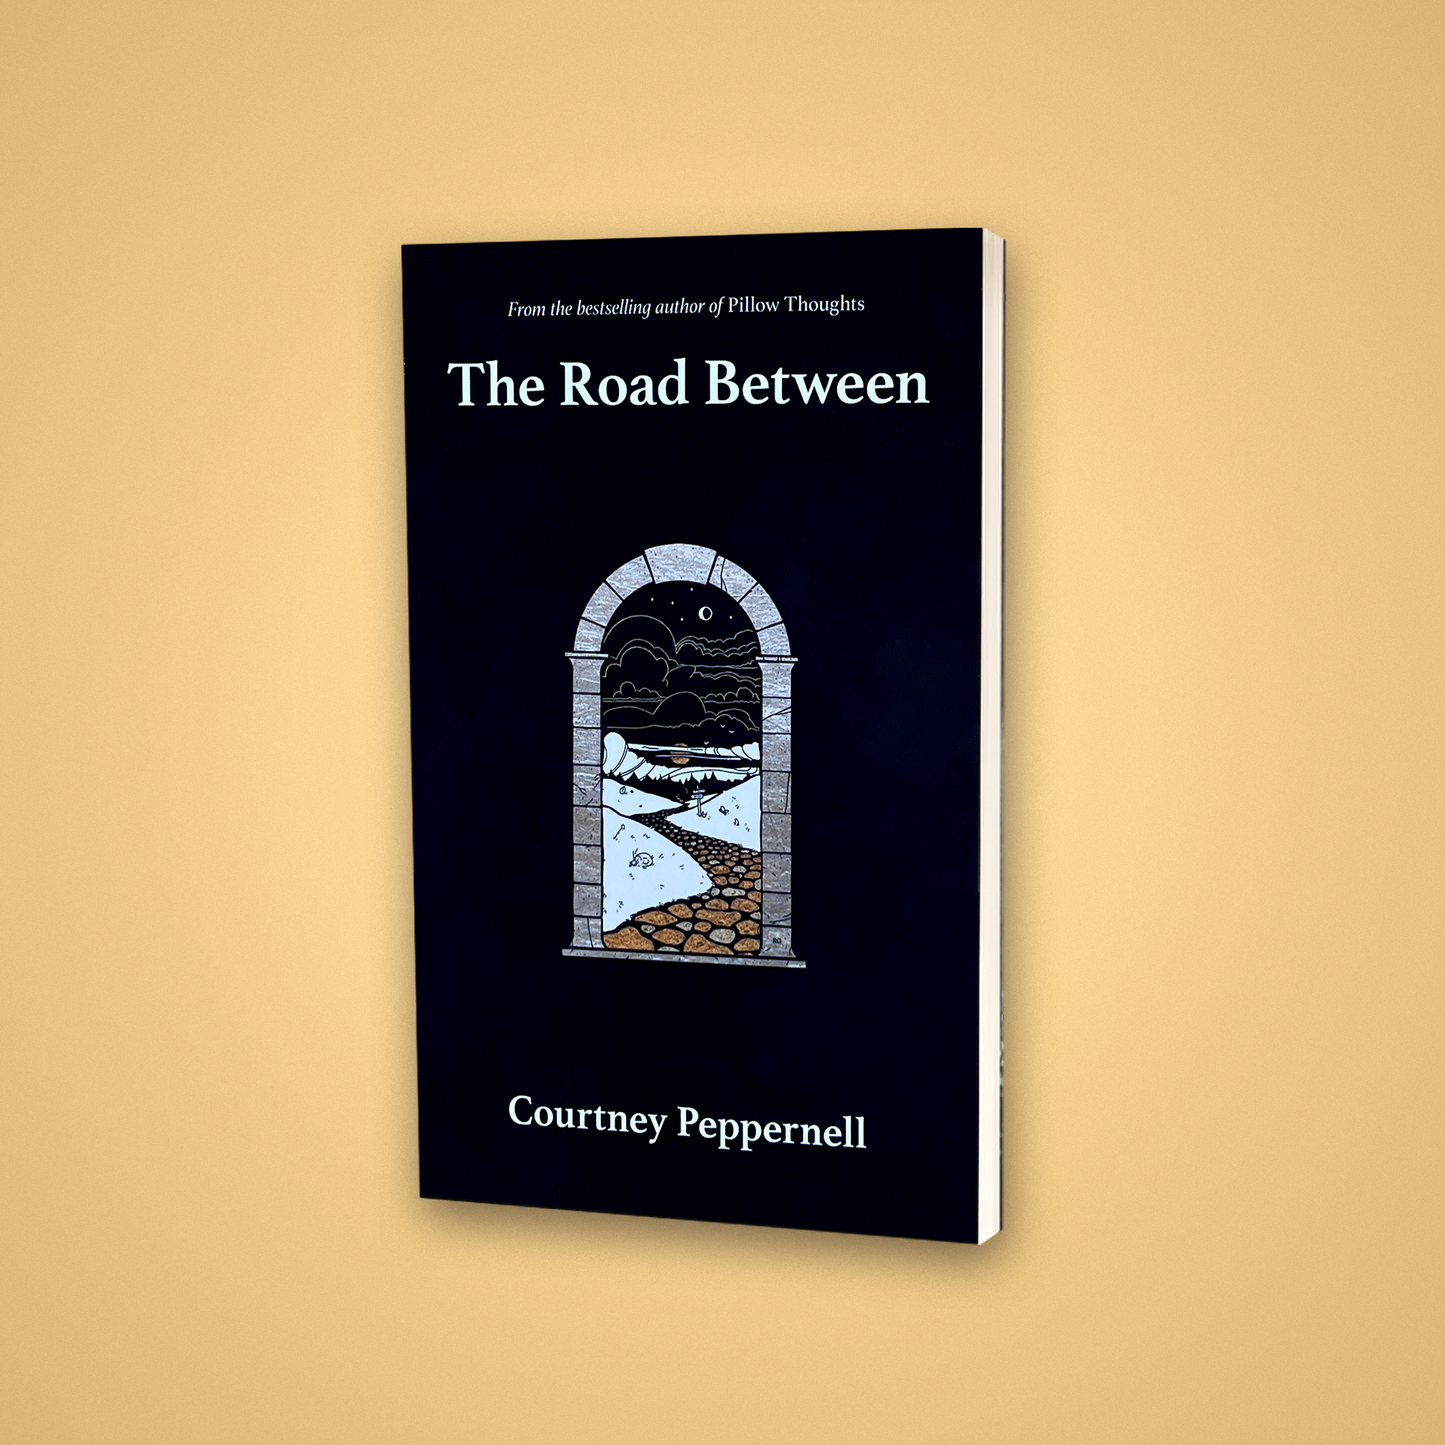 The Road Between - Book with Autograph by Courtney Peppernell